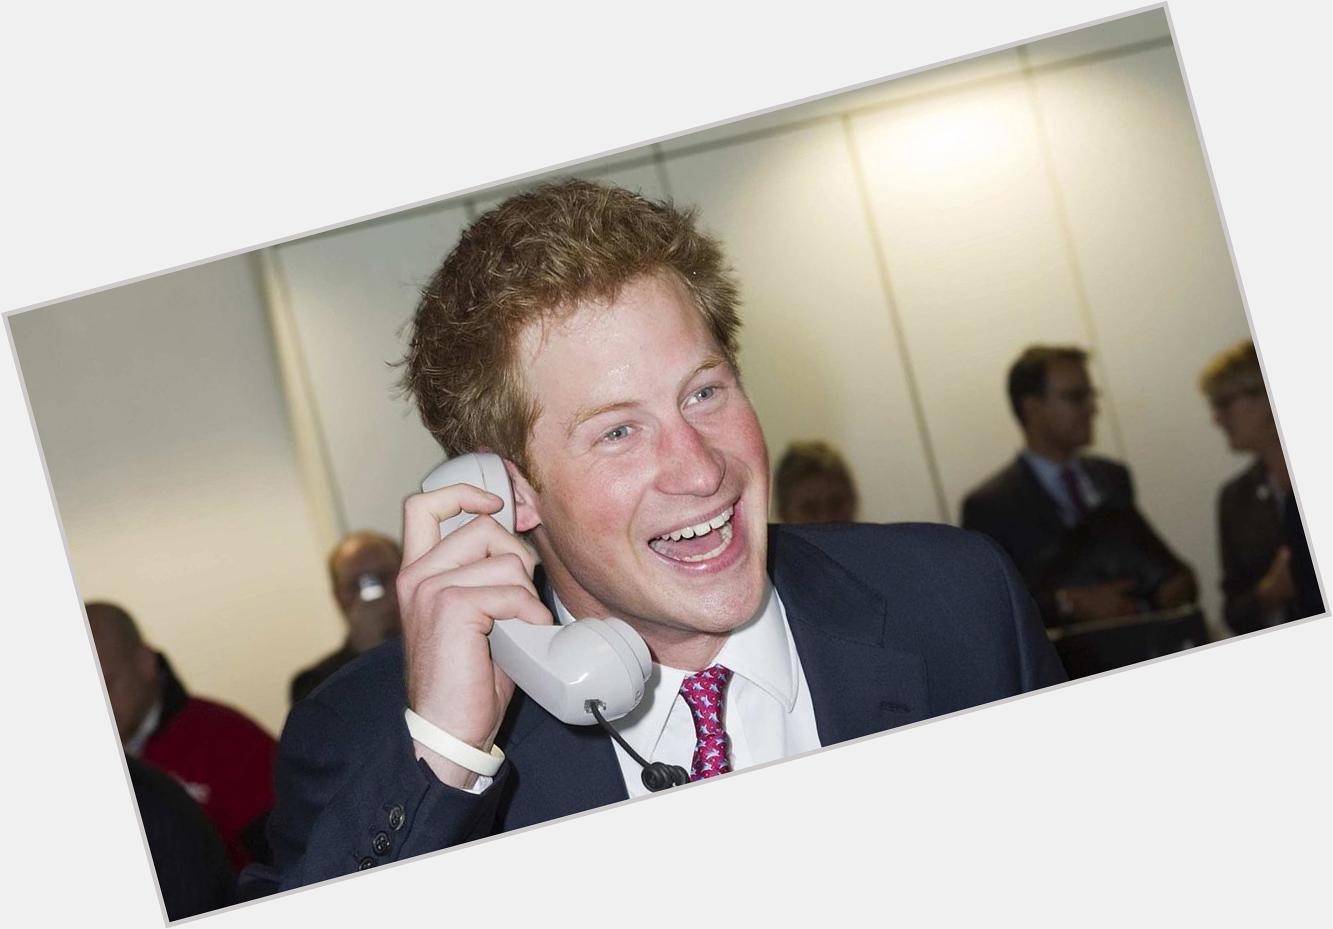 Happy birthday, Prince Harry! Celebrate with his goofiest facial expressions:  